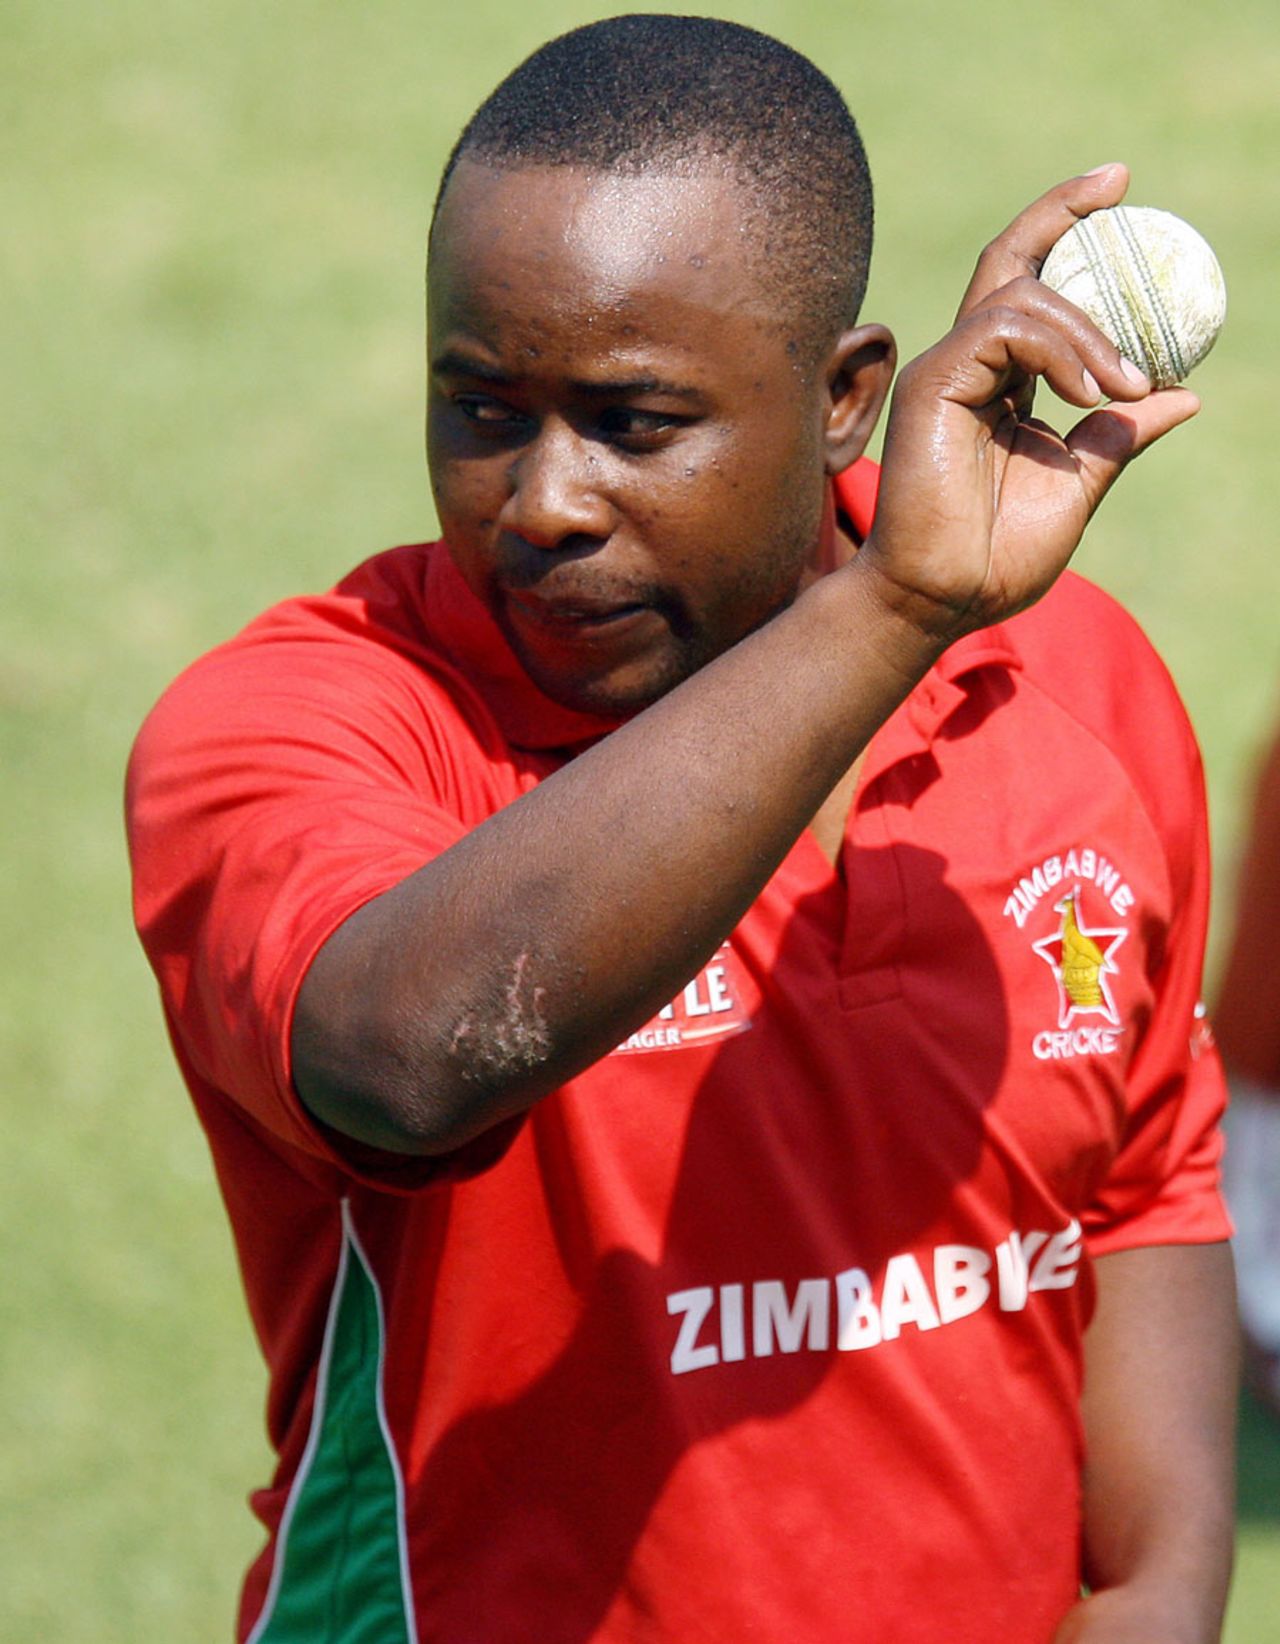 Prosper Utseya holds up the match ball after his five-for, Zimbabwe v South Africa, tri-series, Harare, August 29, 2014